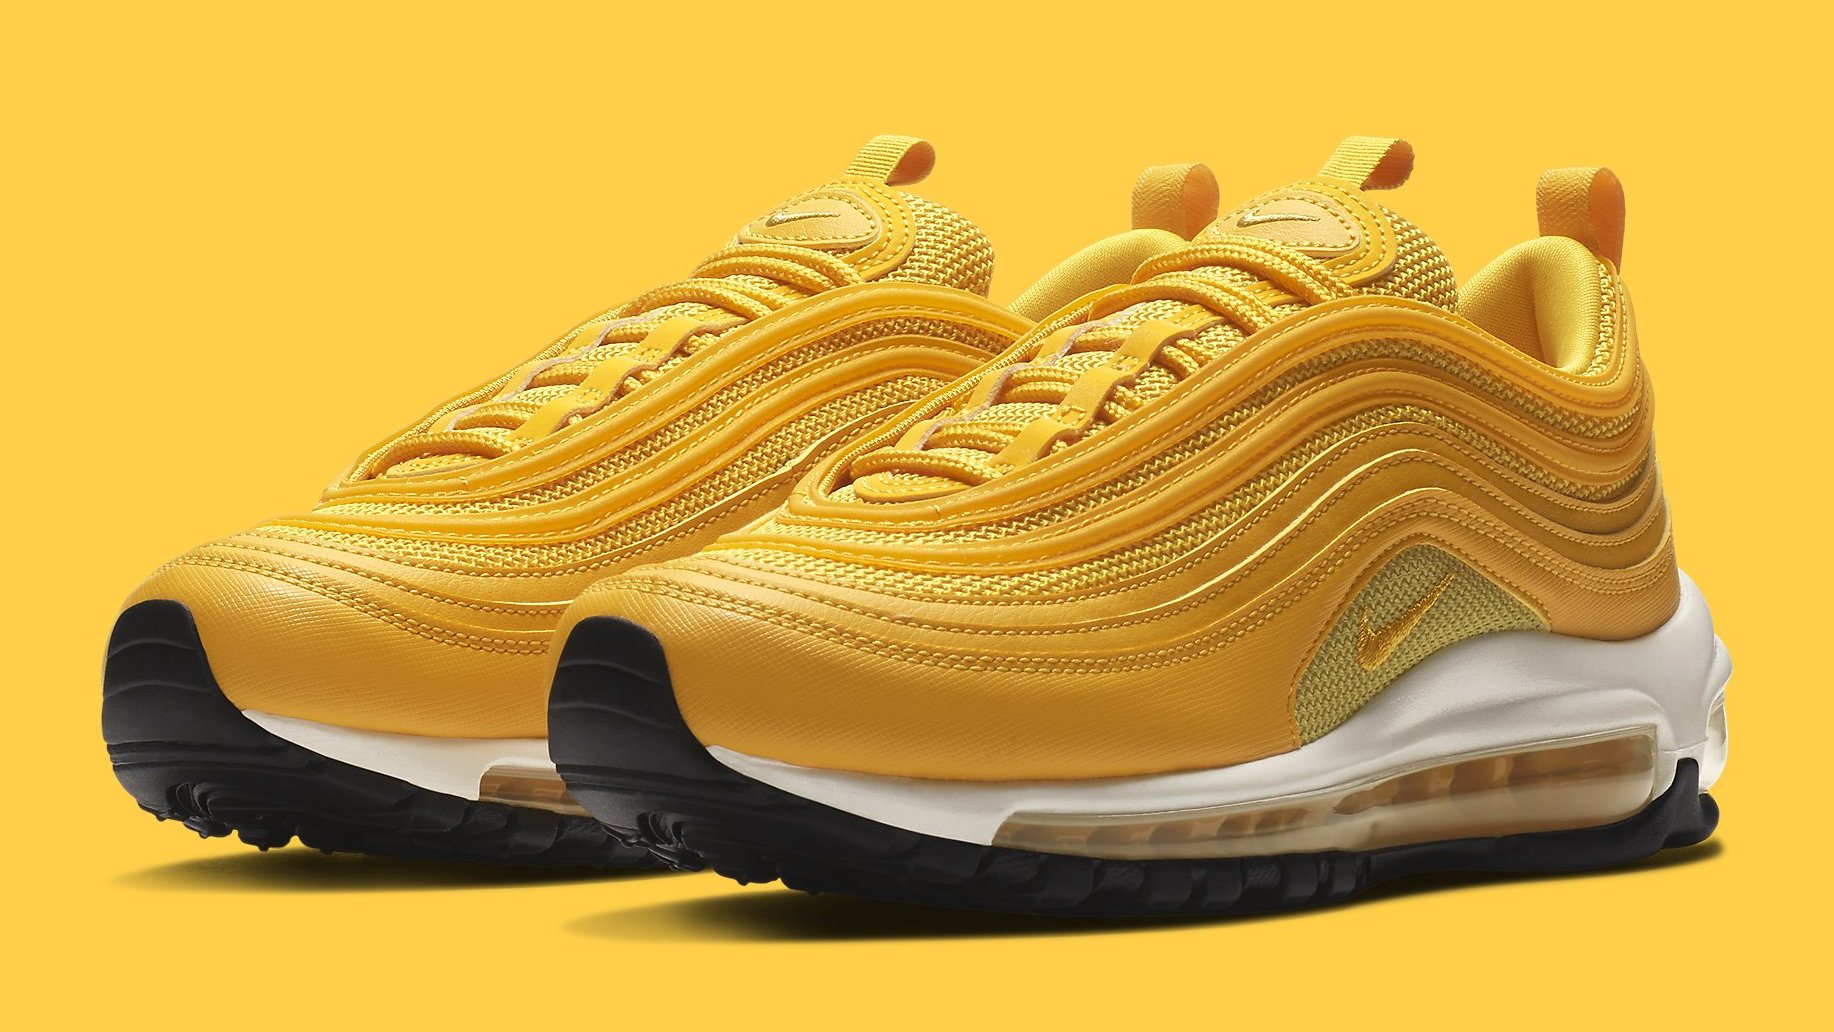 tortur lanthan gift The 'Mustard' Nike Air Max 97 Is Coming Soon | Complex